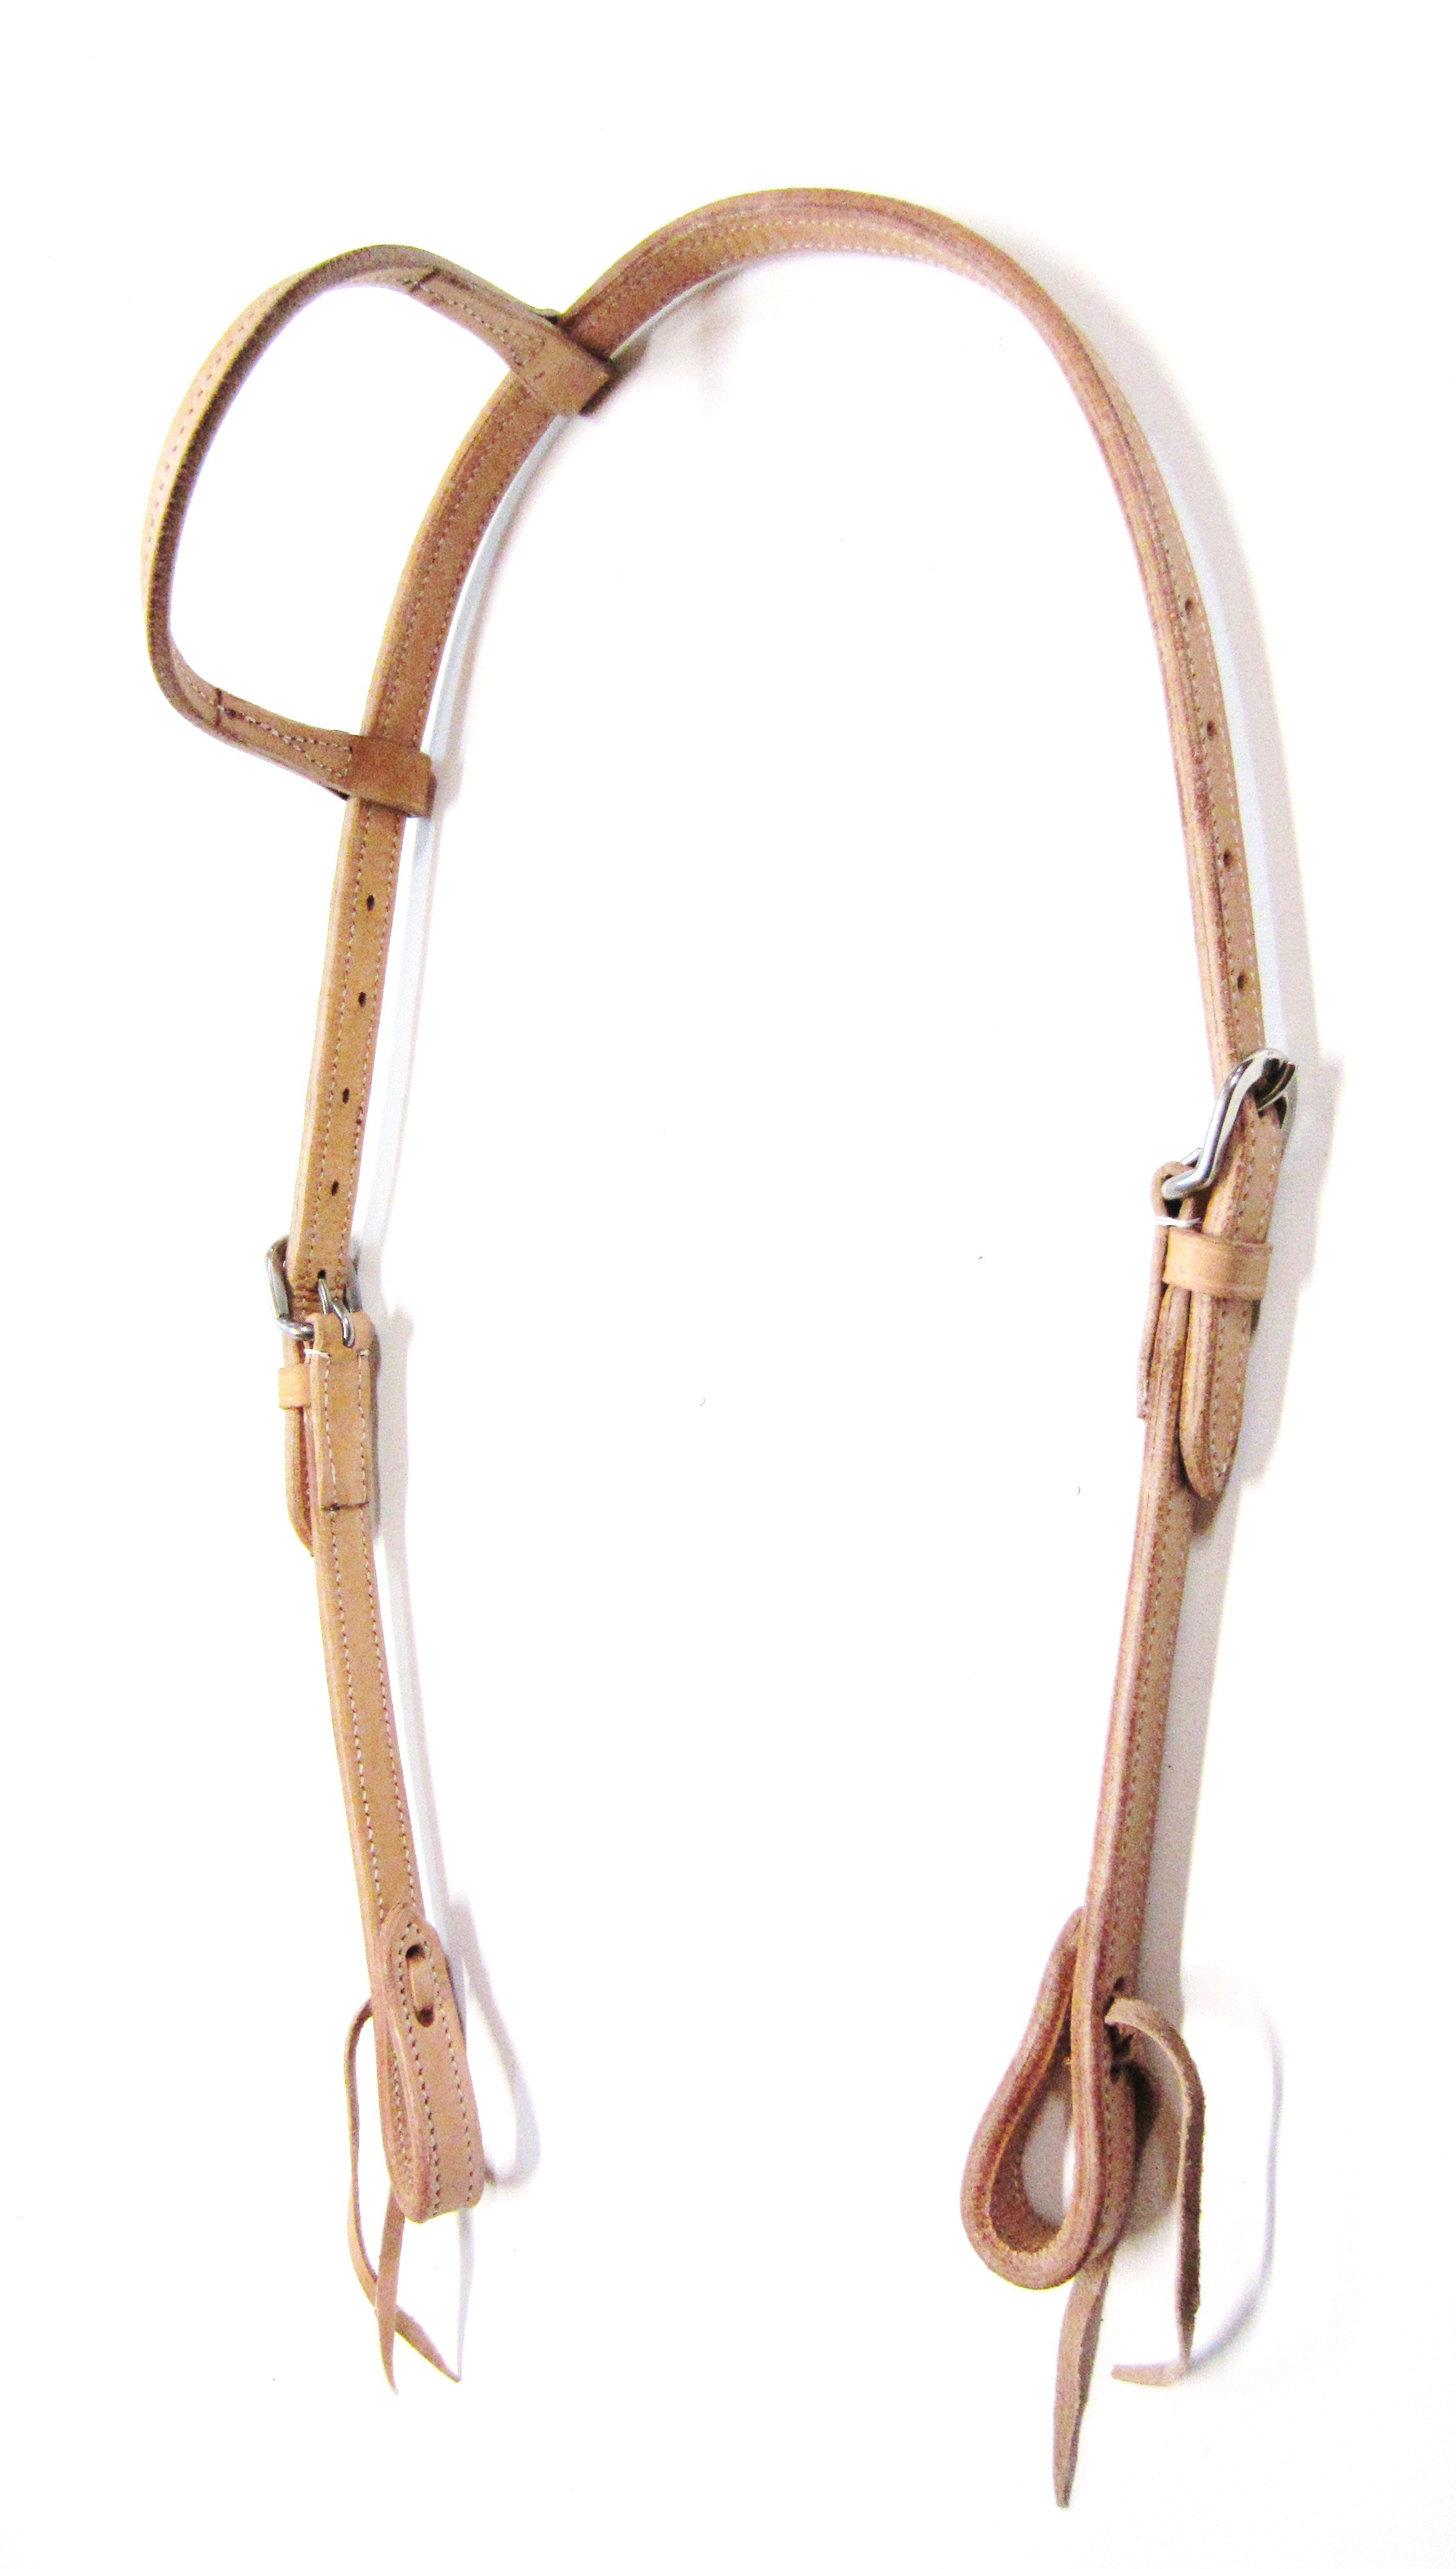 One-ear bridle in 3 colors - for bitless bridles